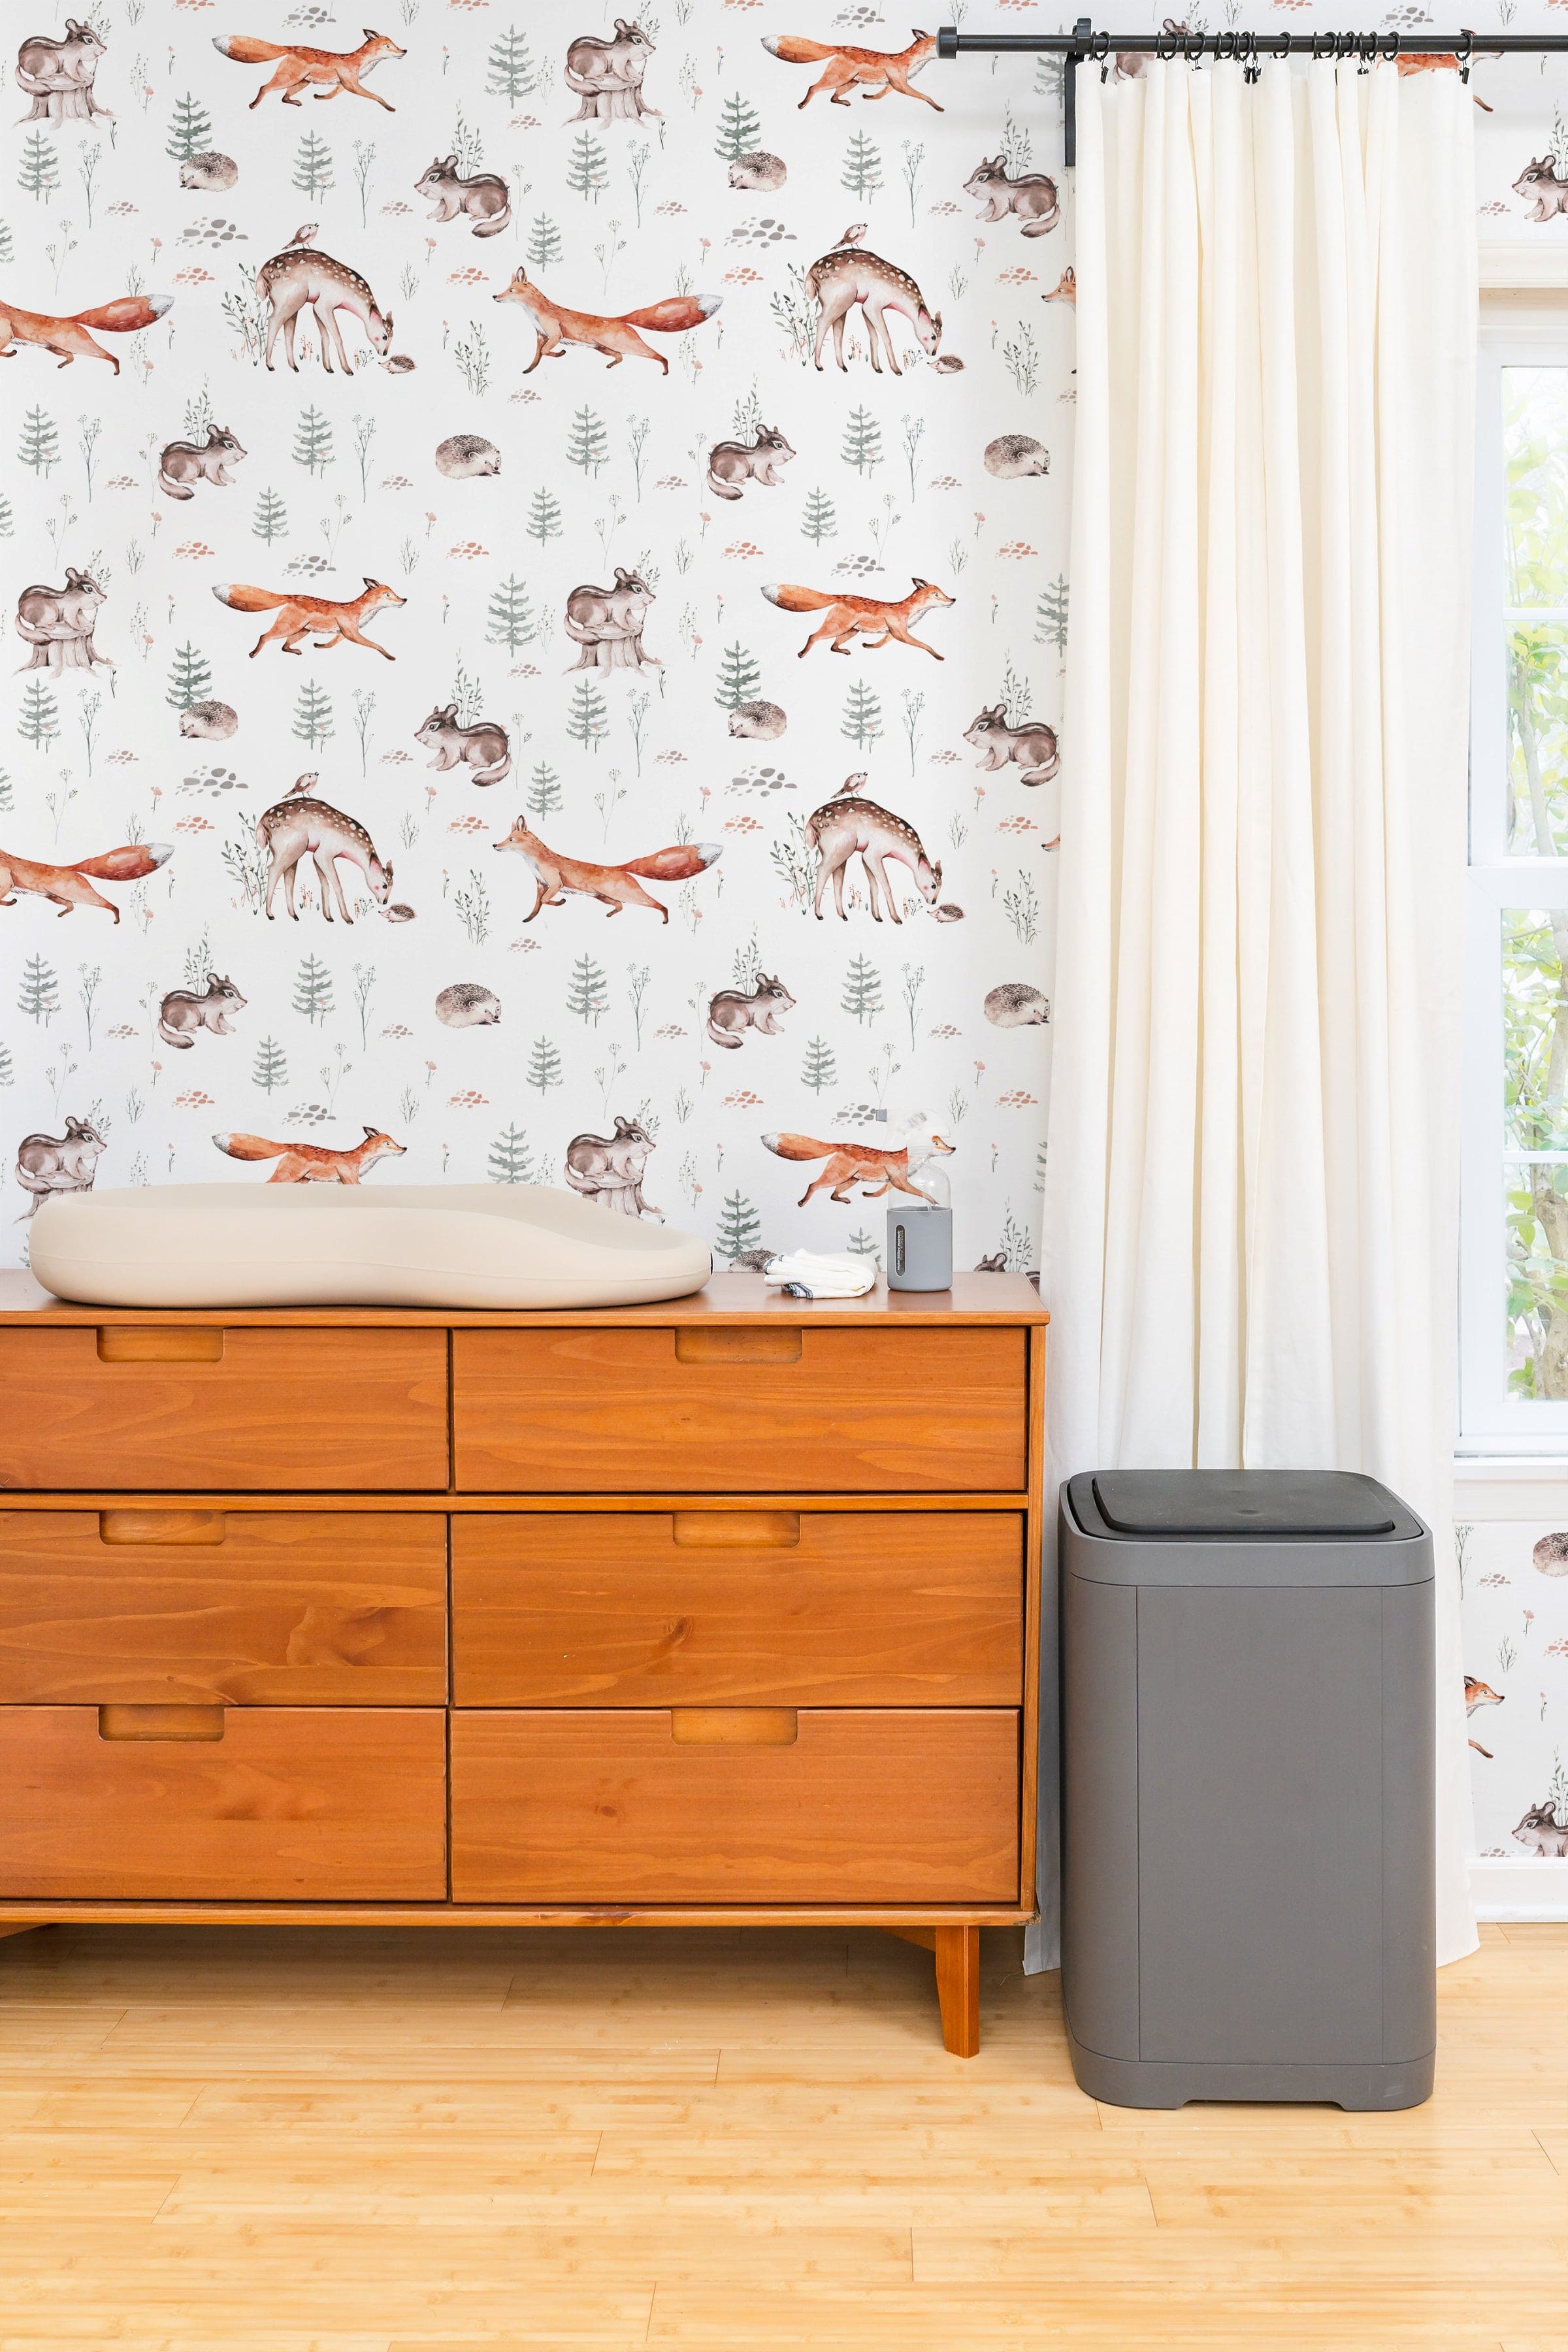 A nursery room showcasing the Woodland Wonder Wallpaper, with playful and gentle illustrations of woodland creatures that create a calm and nurturing environment. The room features minimalist furniture, enhancing the wallpaper's soothing tones.